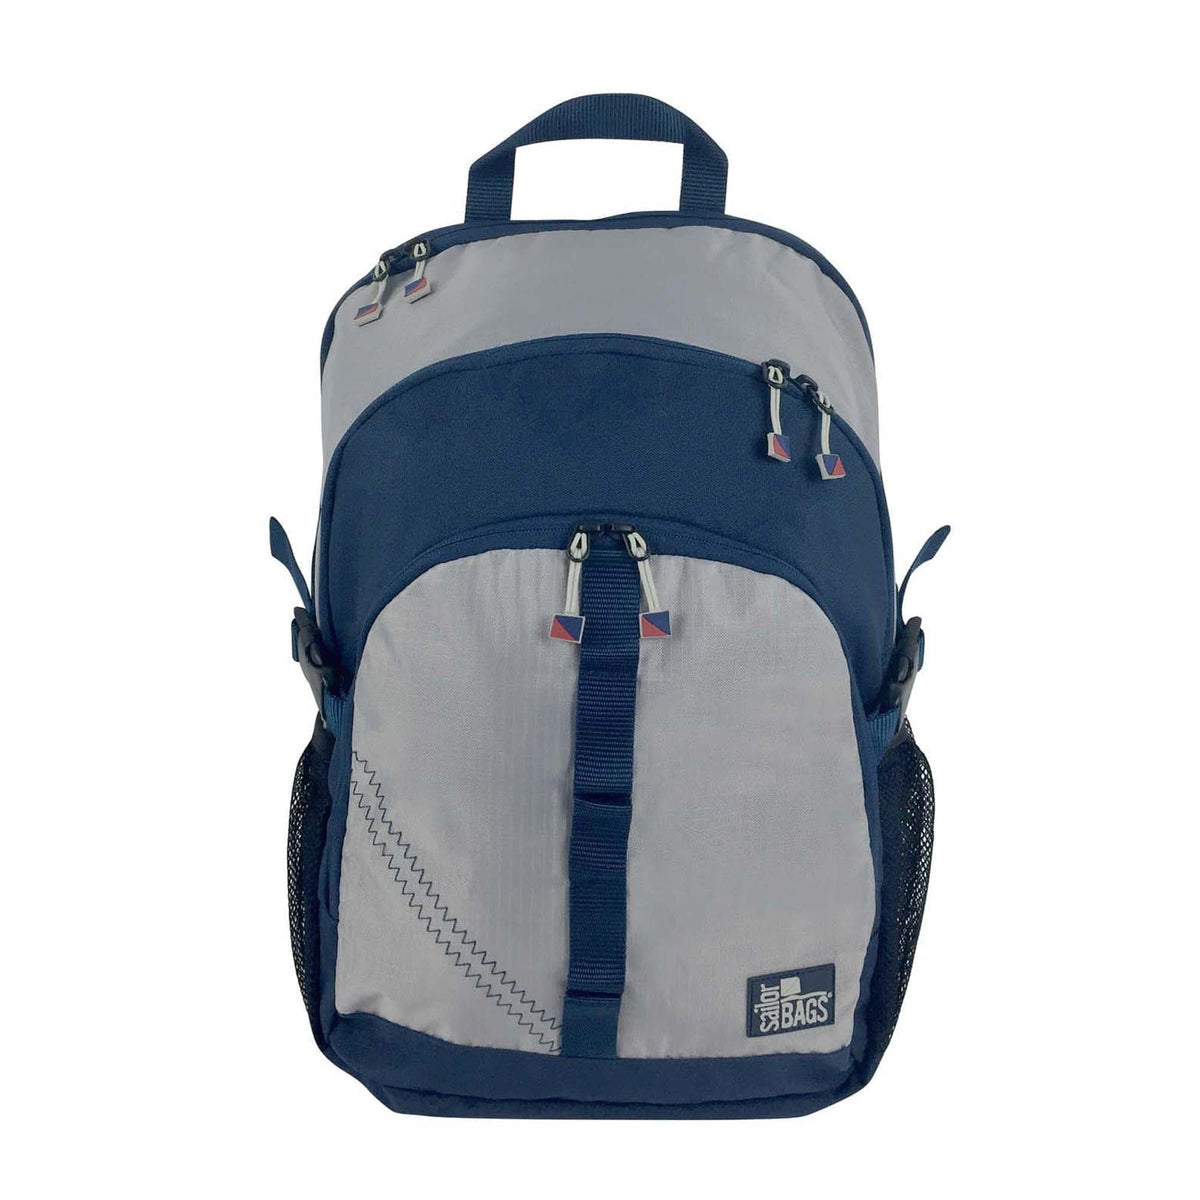 SailorBags Silver Spinnaker Daypack